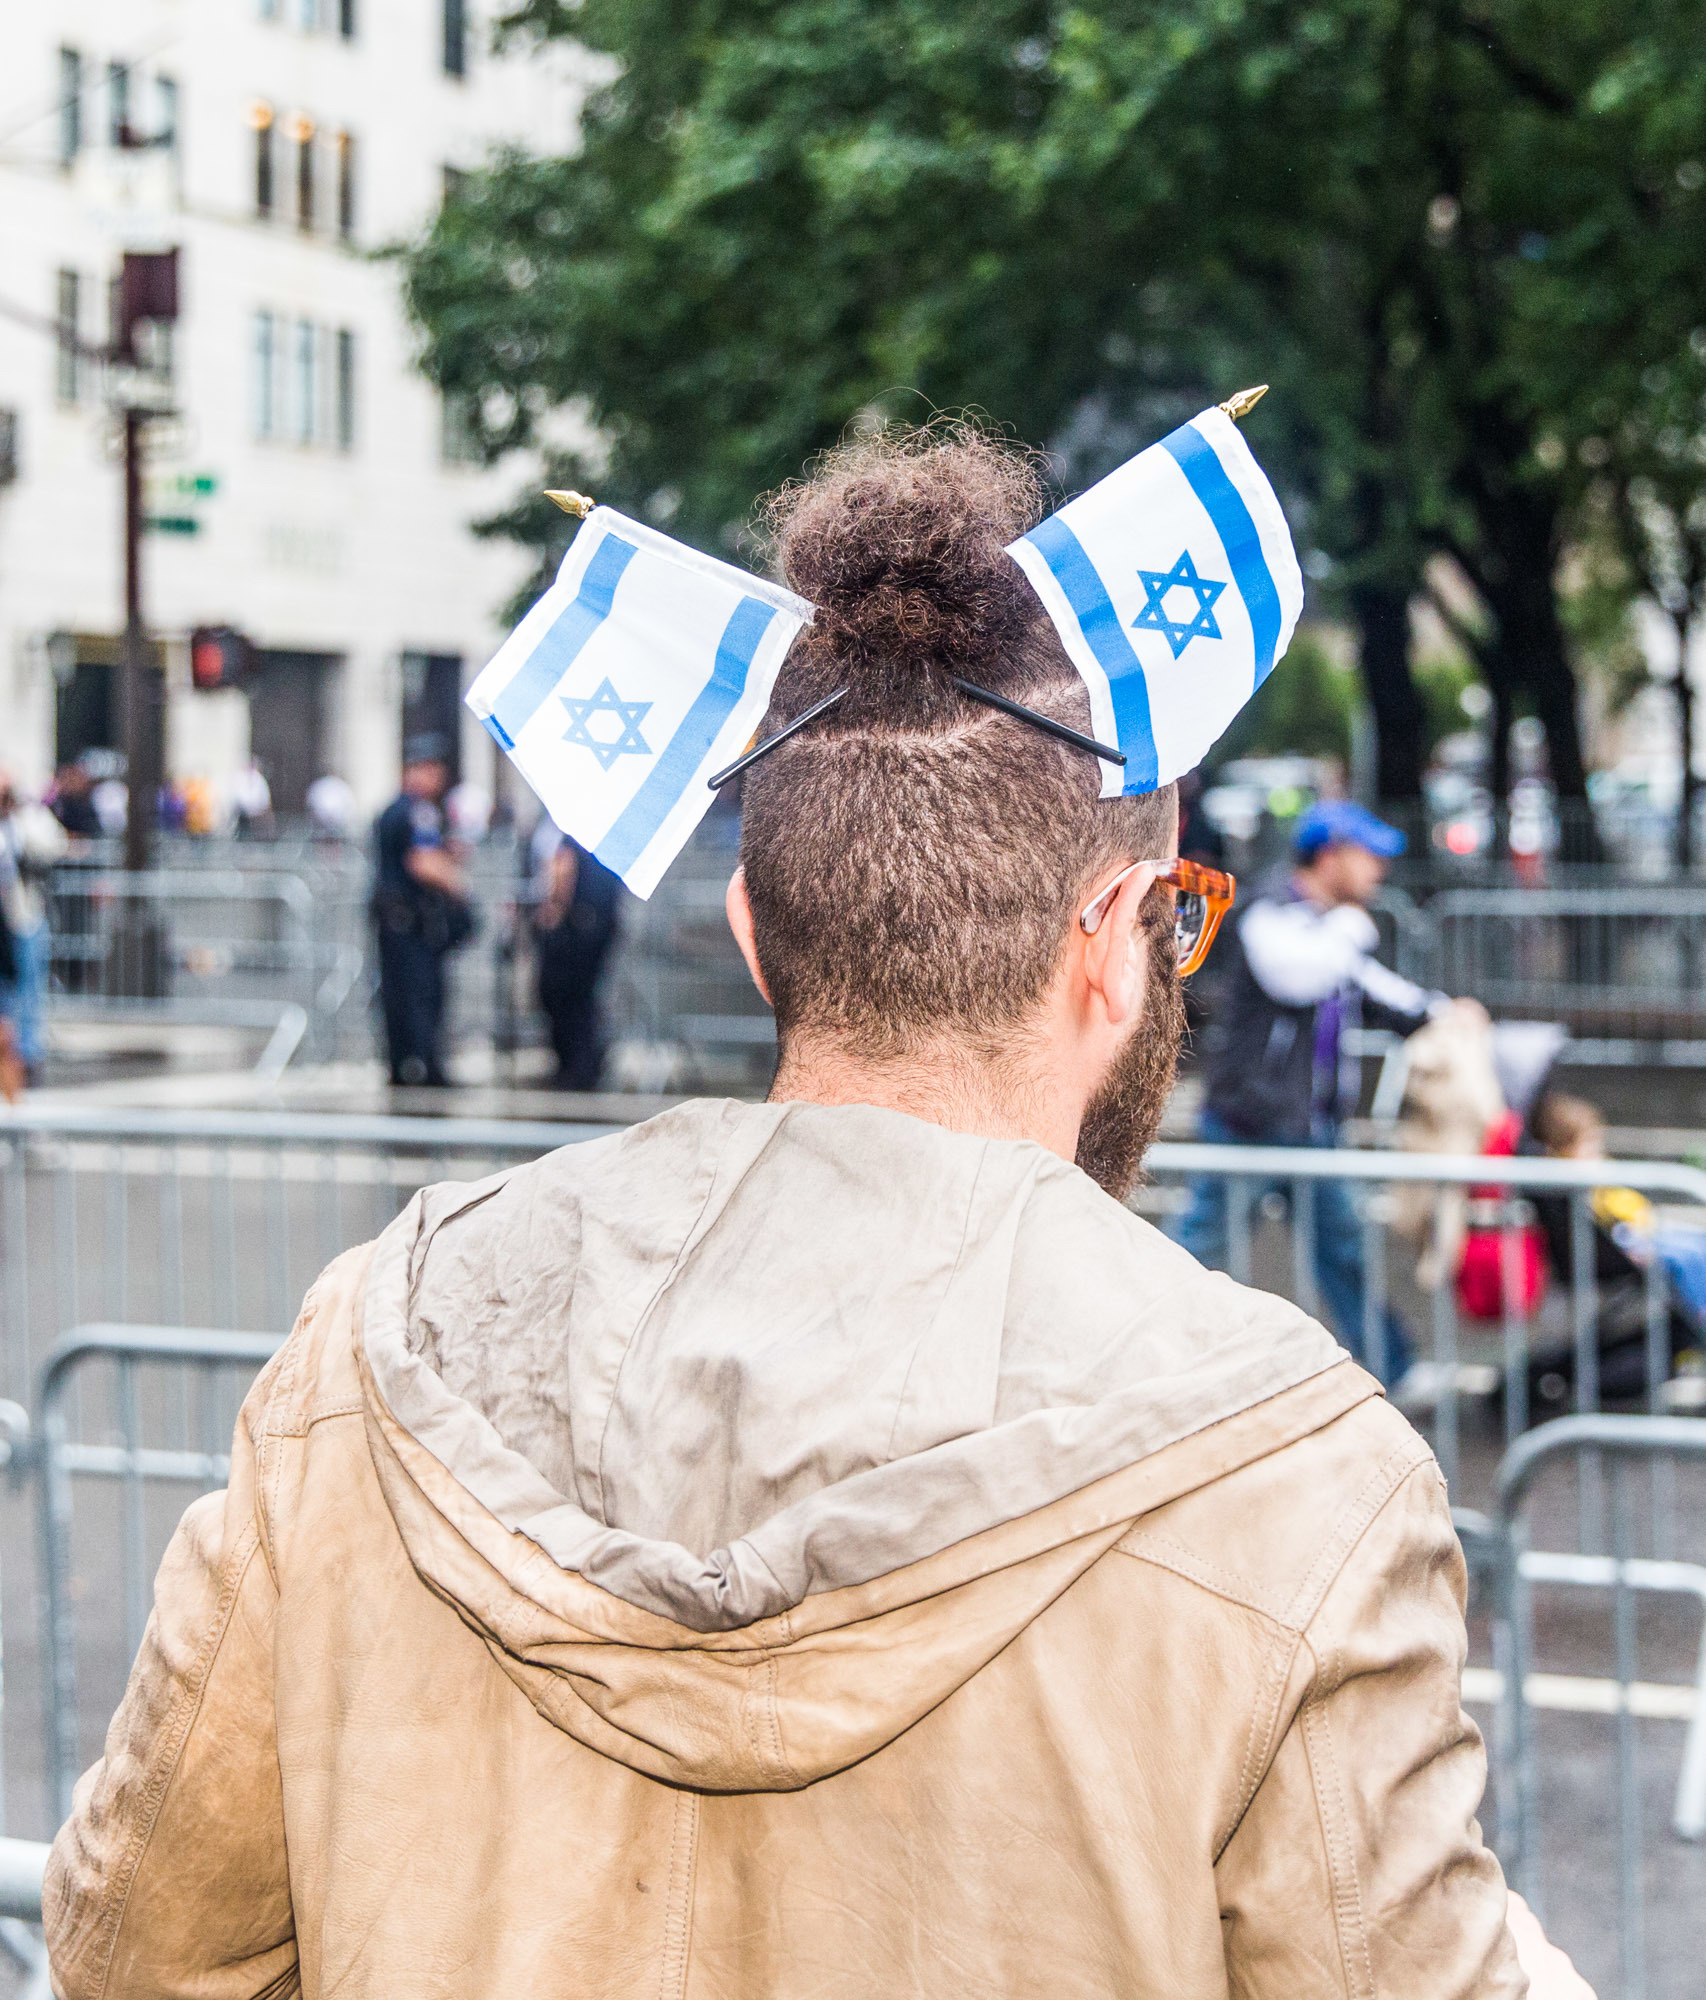 New York's ProIsrael Parade Was Rainy, but AntiZionists Still Showed